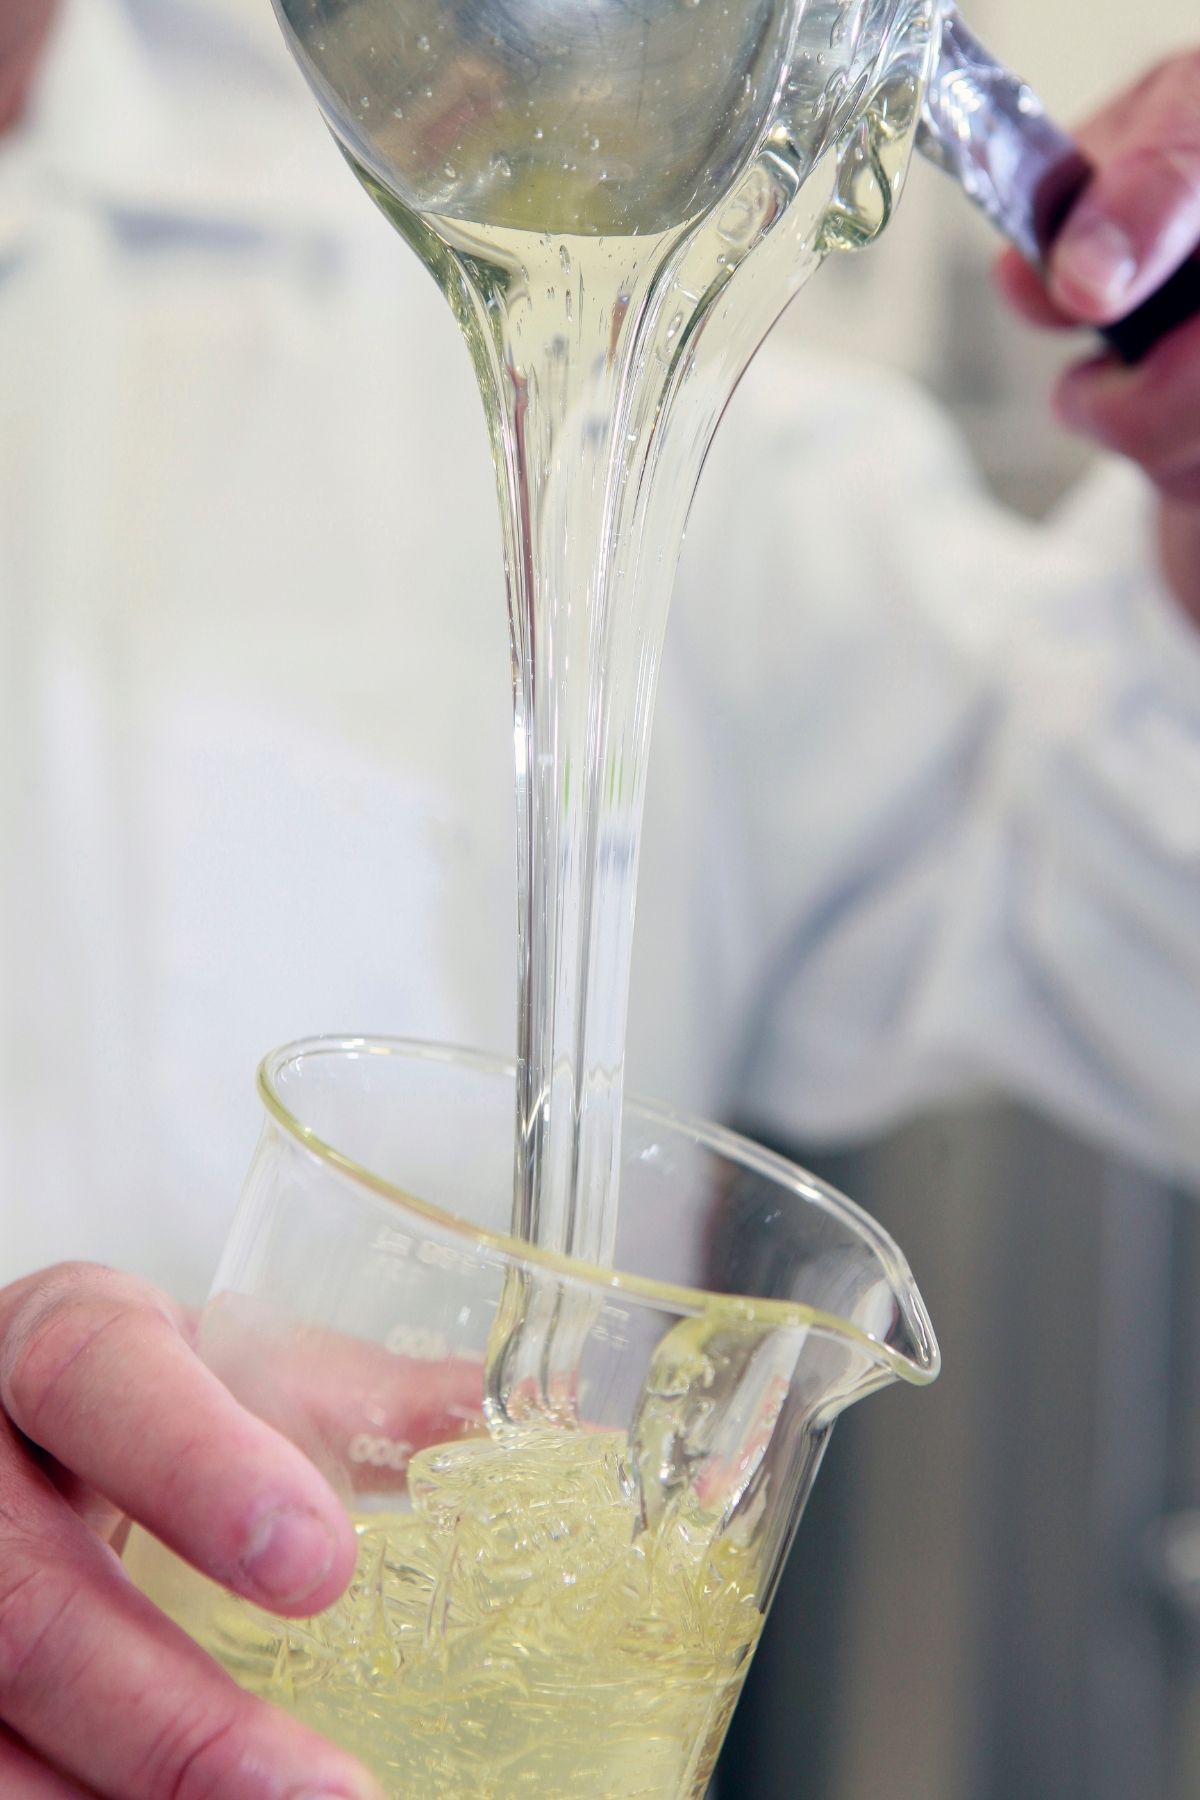 high fructose corn syrup being poured into a beaker.